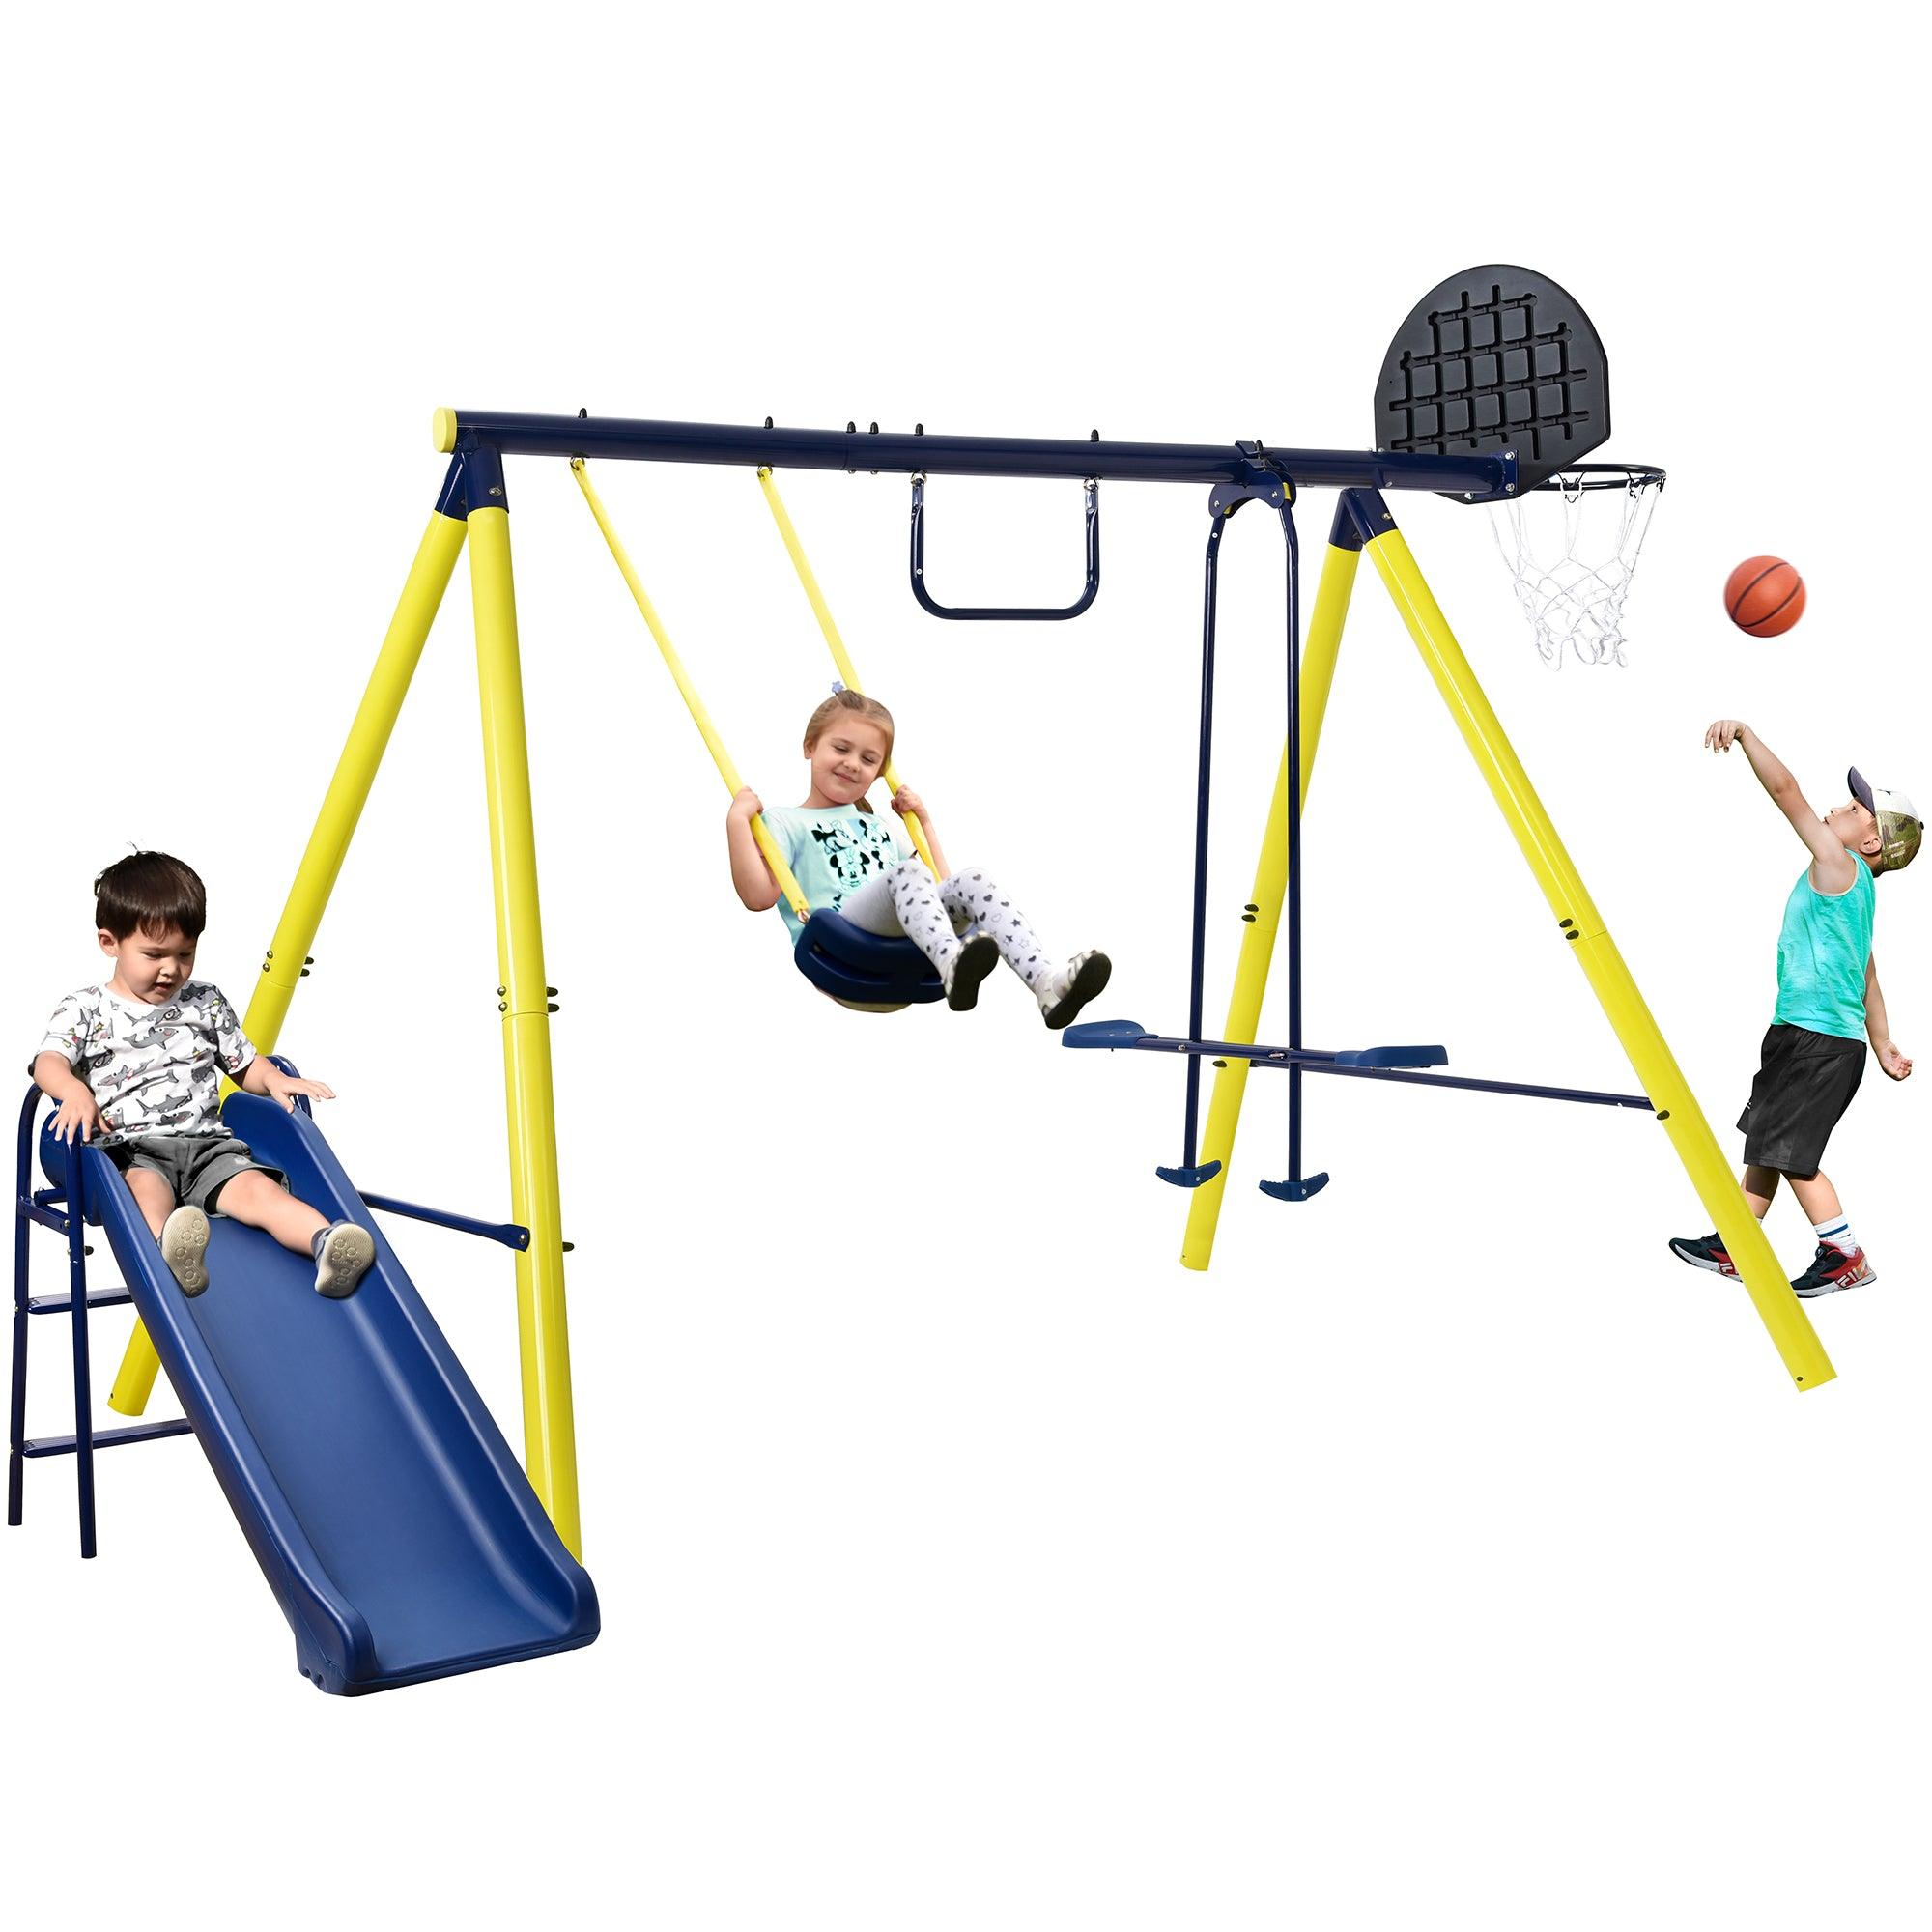 RaDEWAY 5 in 1 Outdoor Tolddler Swing Set with Steel Frame for Playgrond